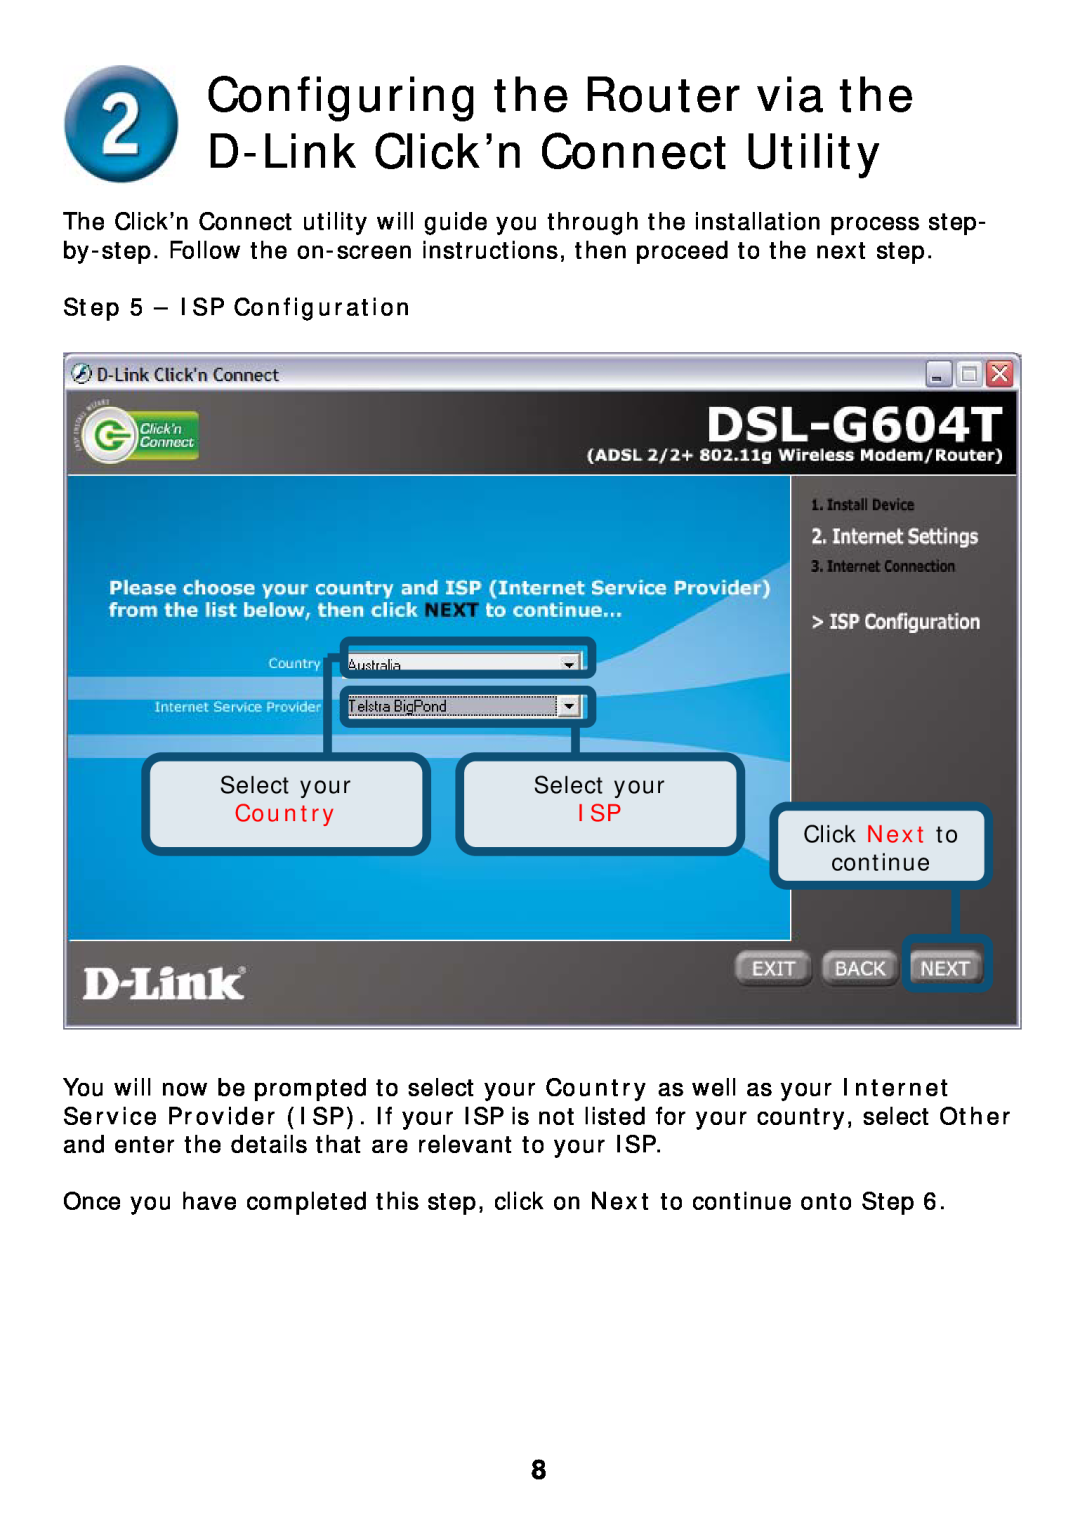 D-Link DSL-G604T specifications Configuring the Router via the D-Link Click’n Connect Utility, ISP Configuration 